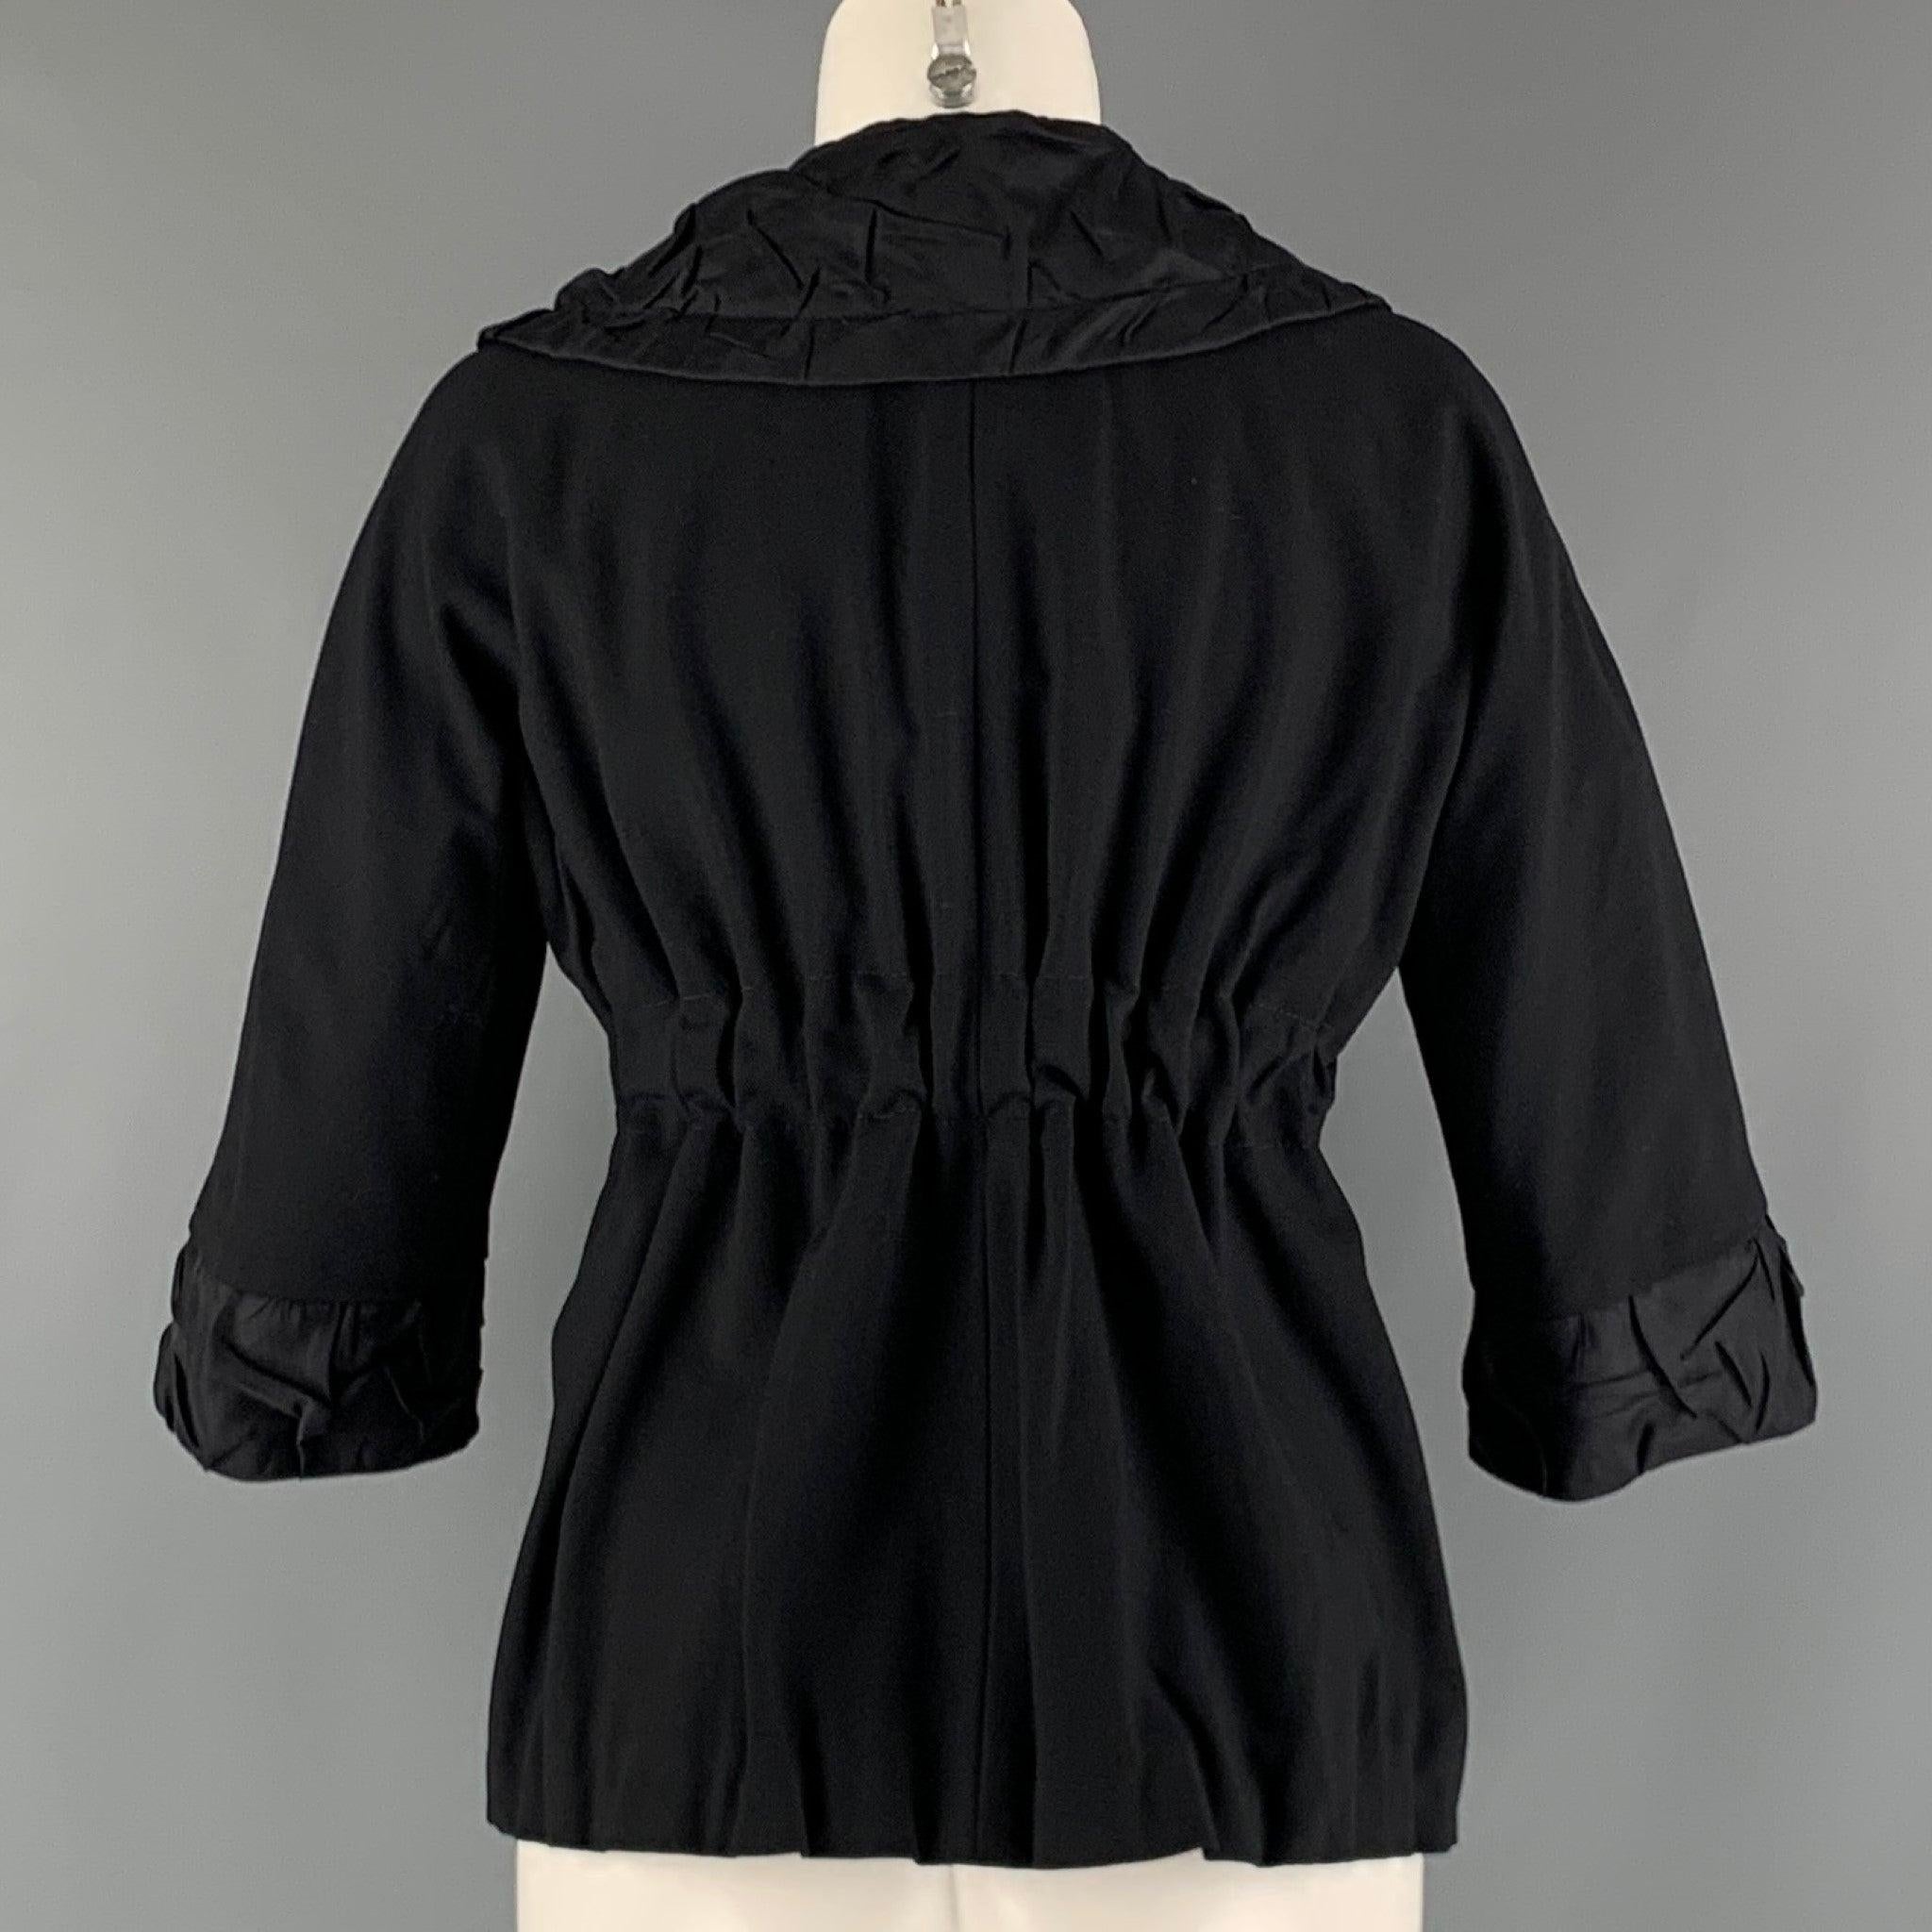 MARC by MARC JACOBS Size 2 Black Viscose Blend Jacket In Excellent Condition For Sale In San Francisco, CA